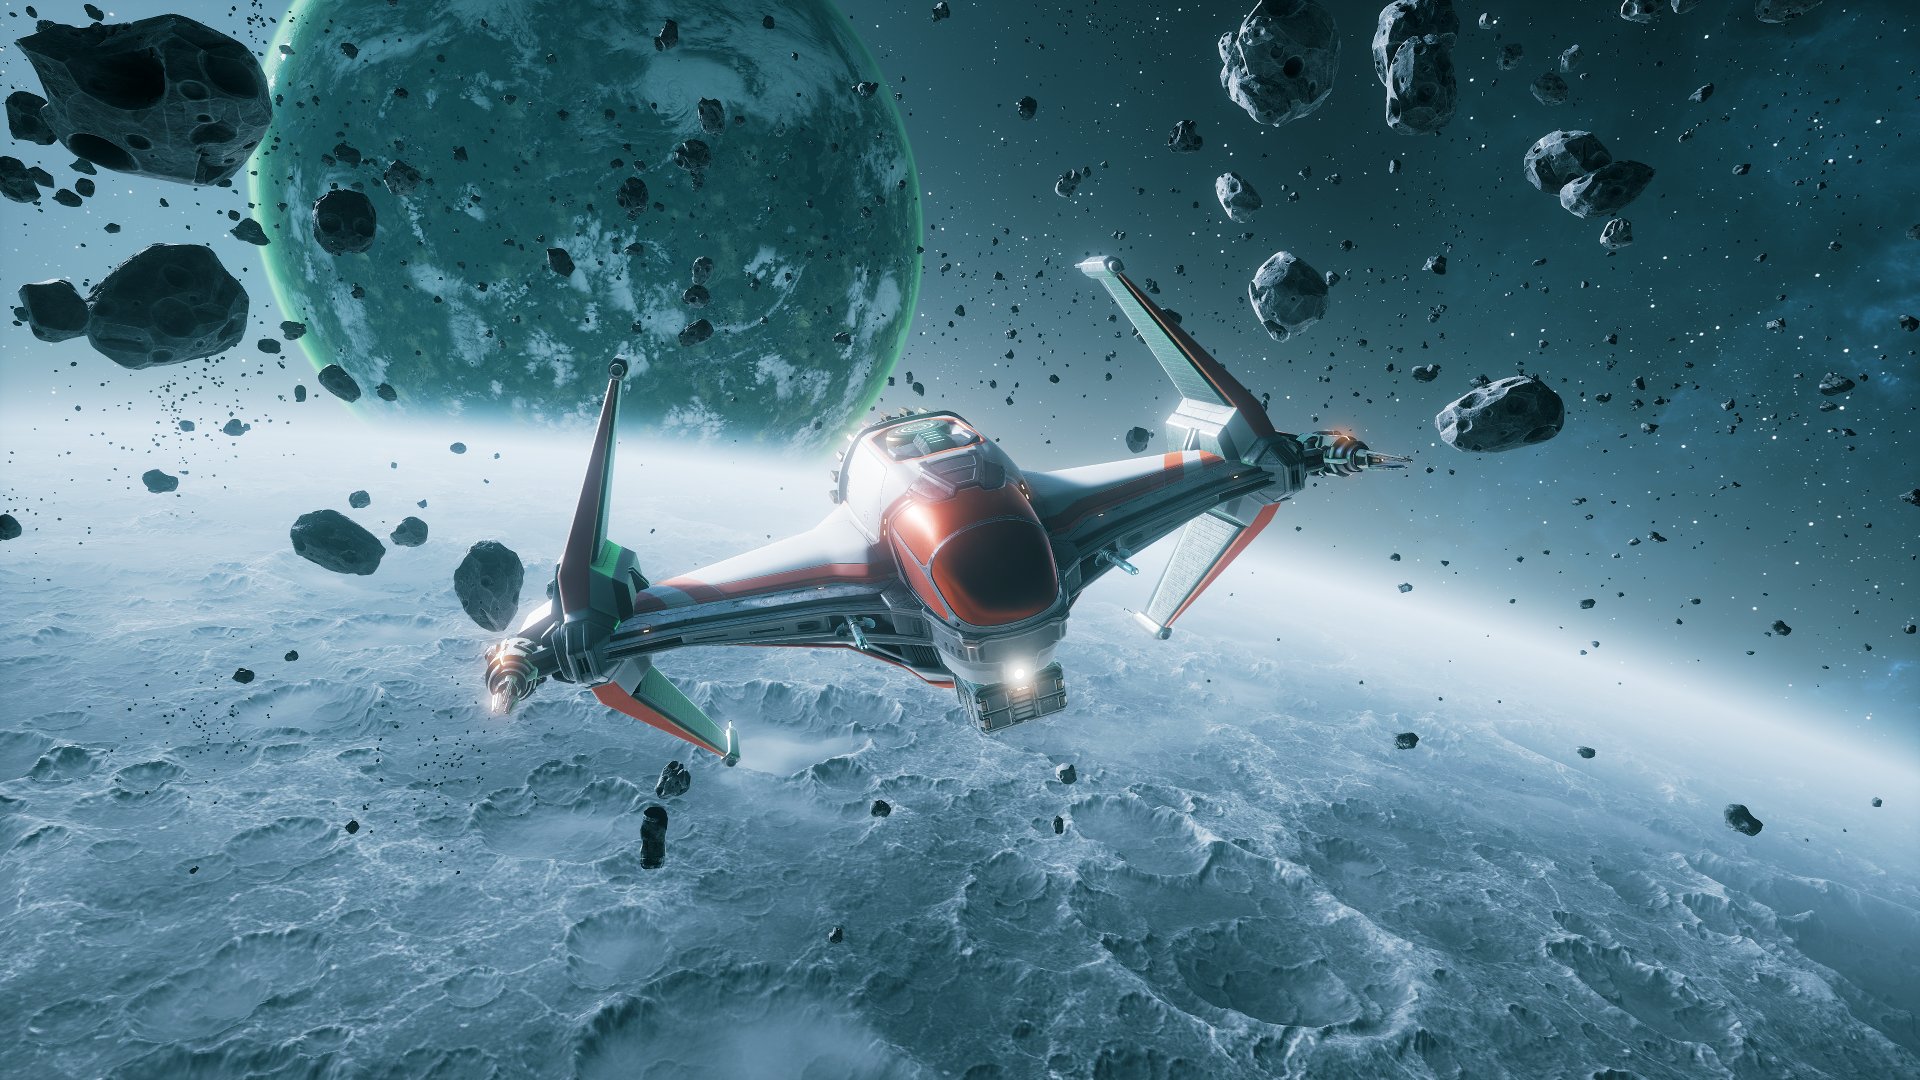 General 1920x1080 space spaceship planet science fiction everspace